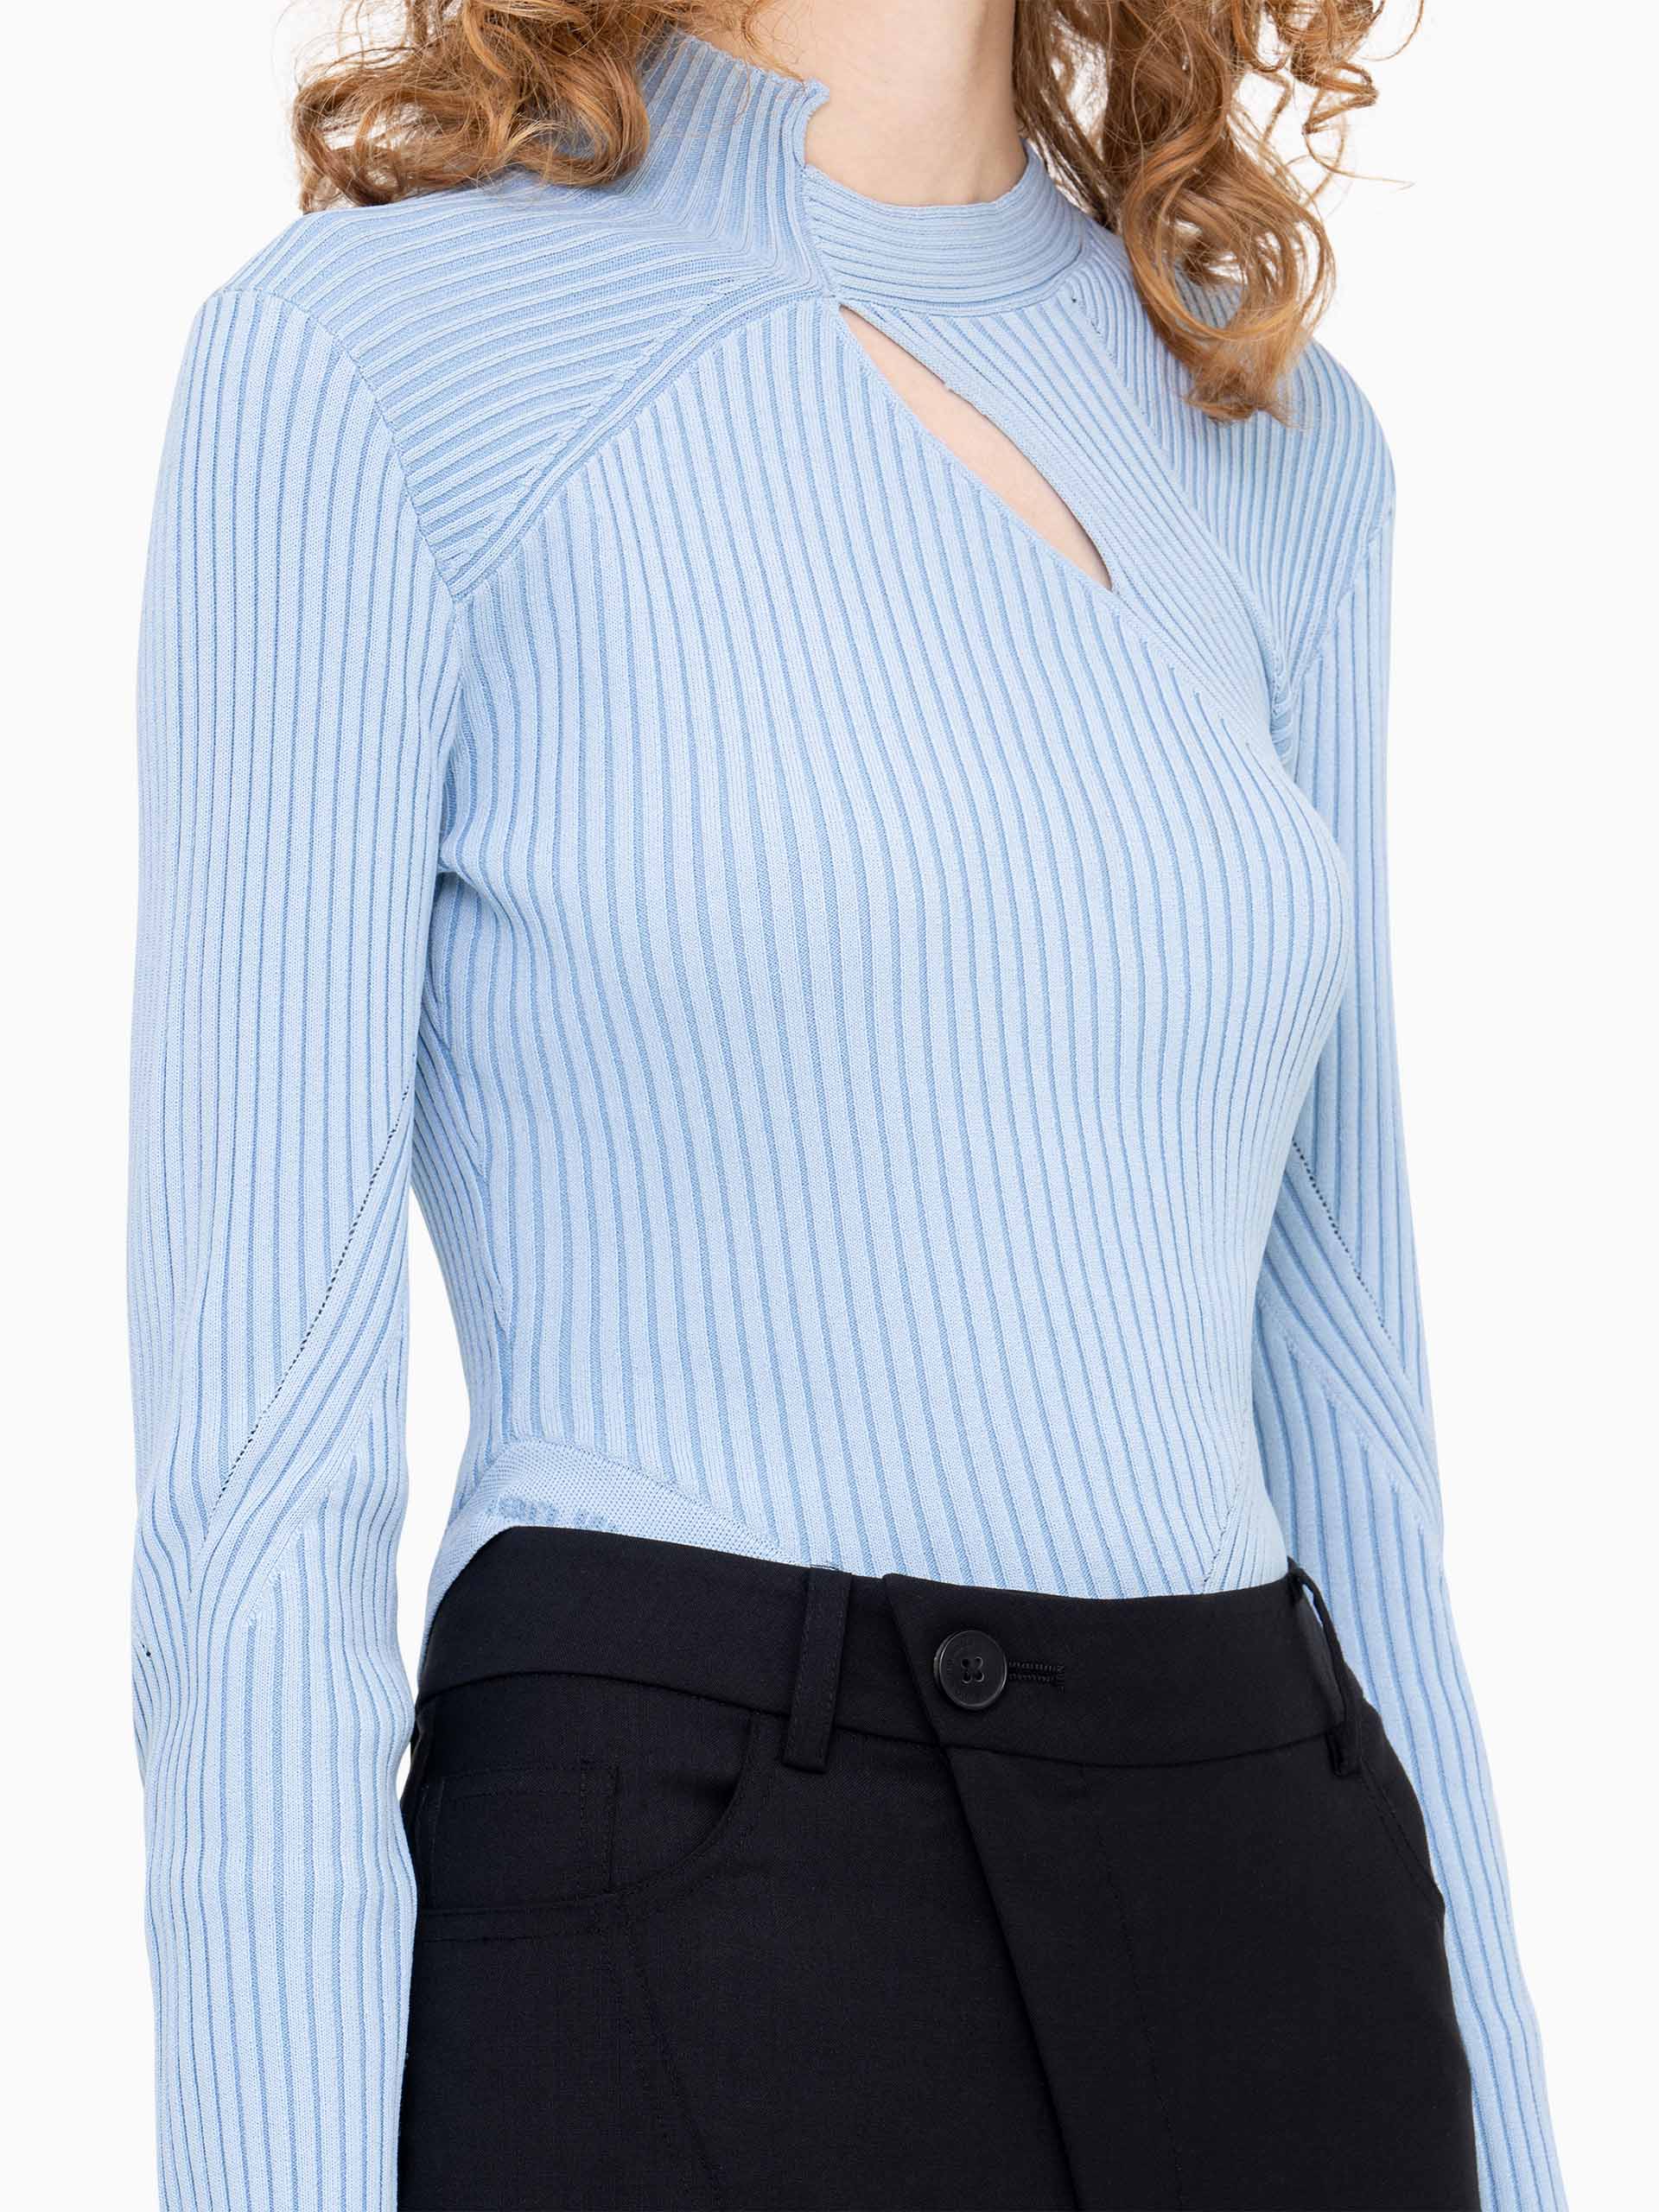 KNIT LONG SLEEVE TOP